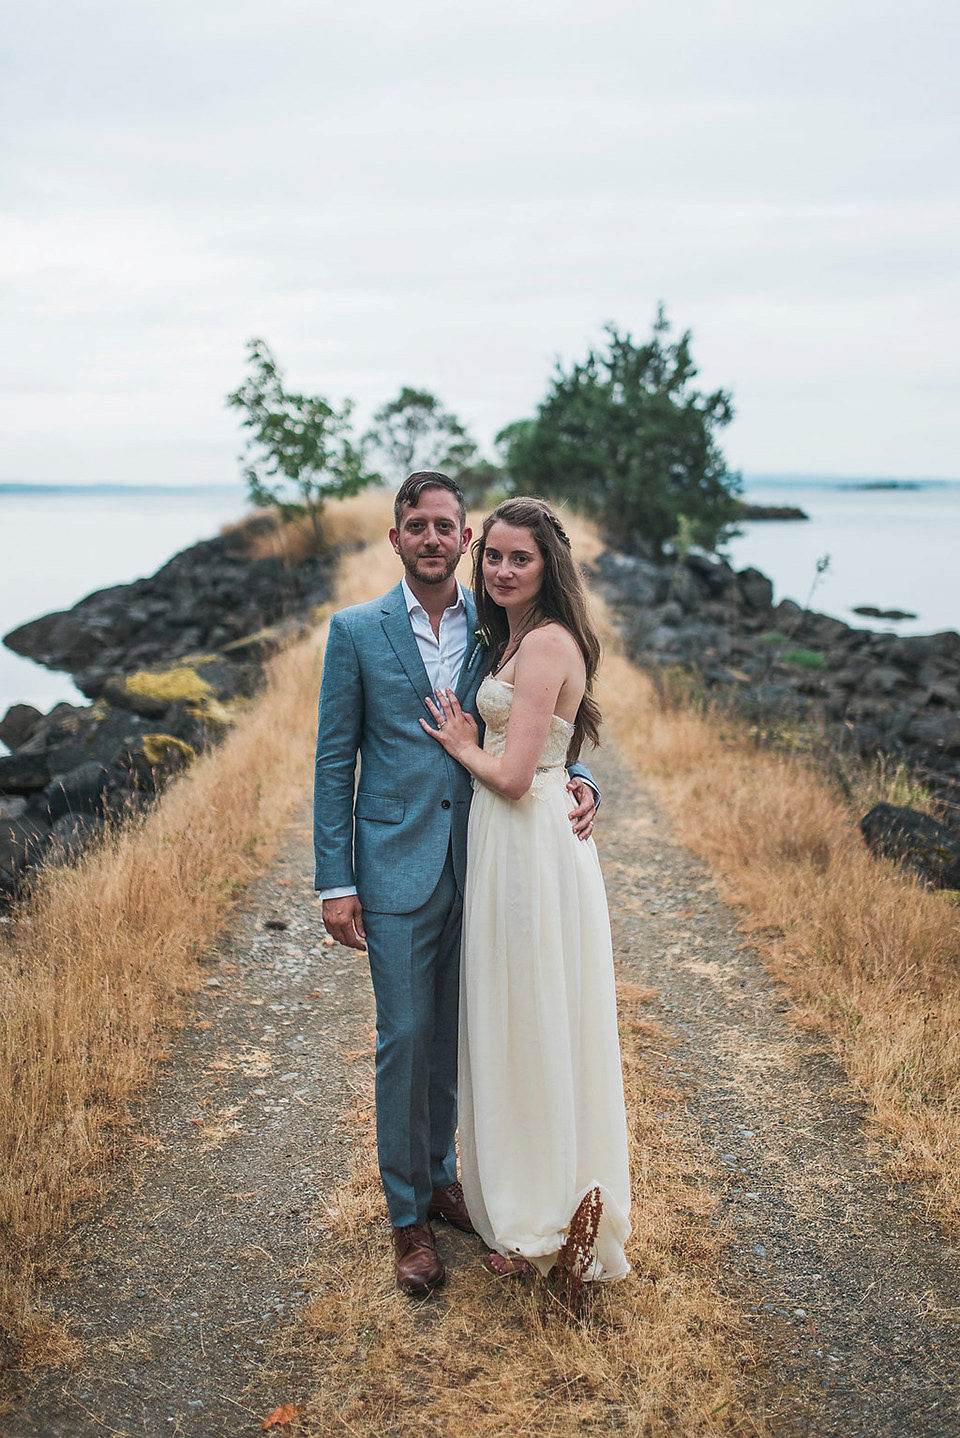 A Sarah Seven dress for a beautifully natural wedding in British Columbia. Images by Nordica Photography.